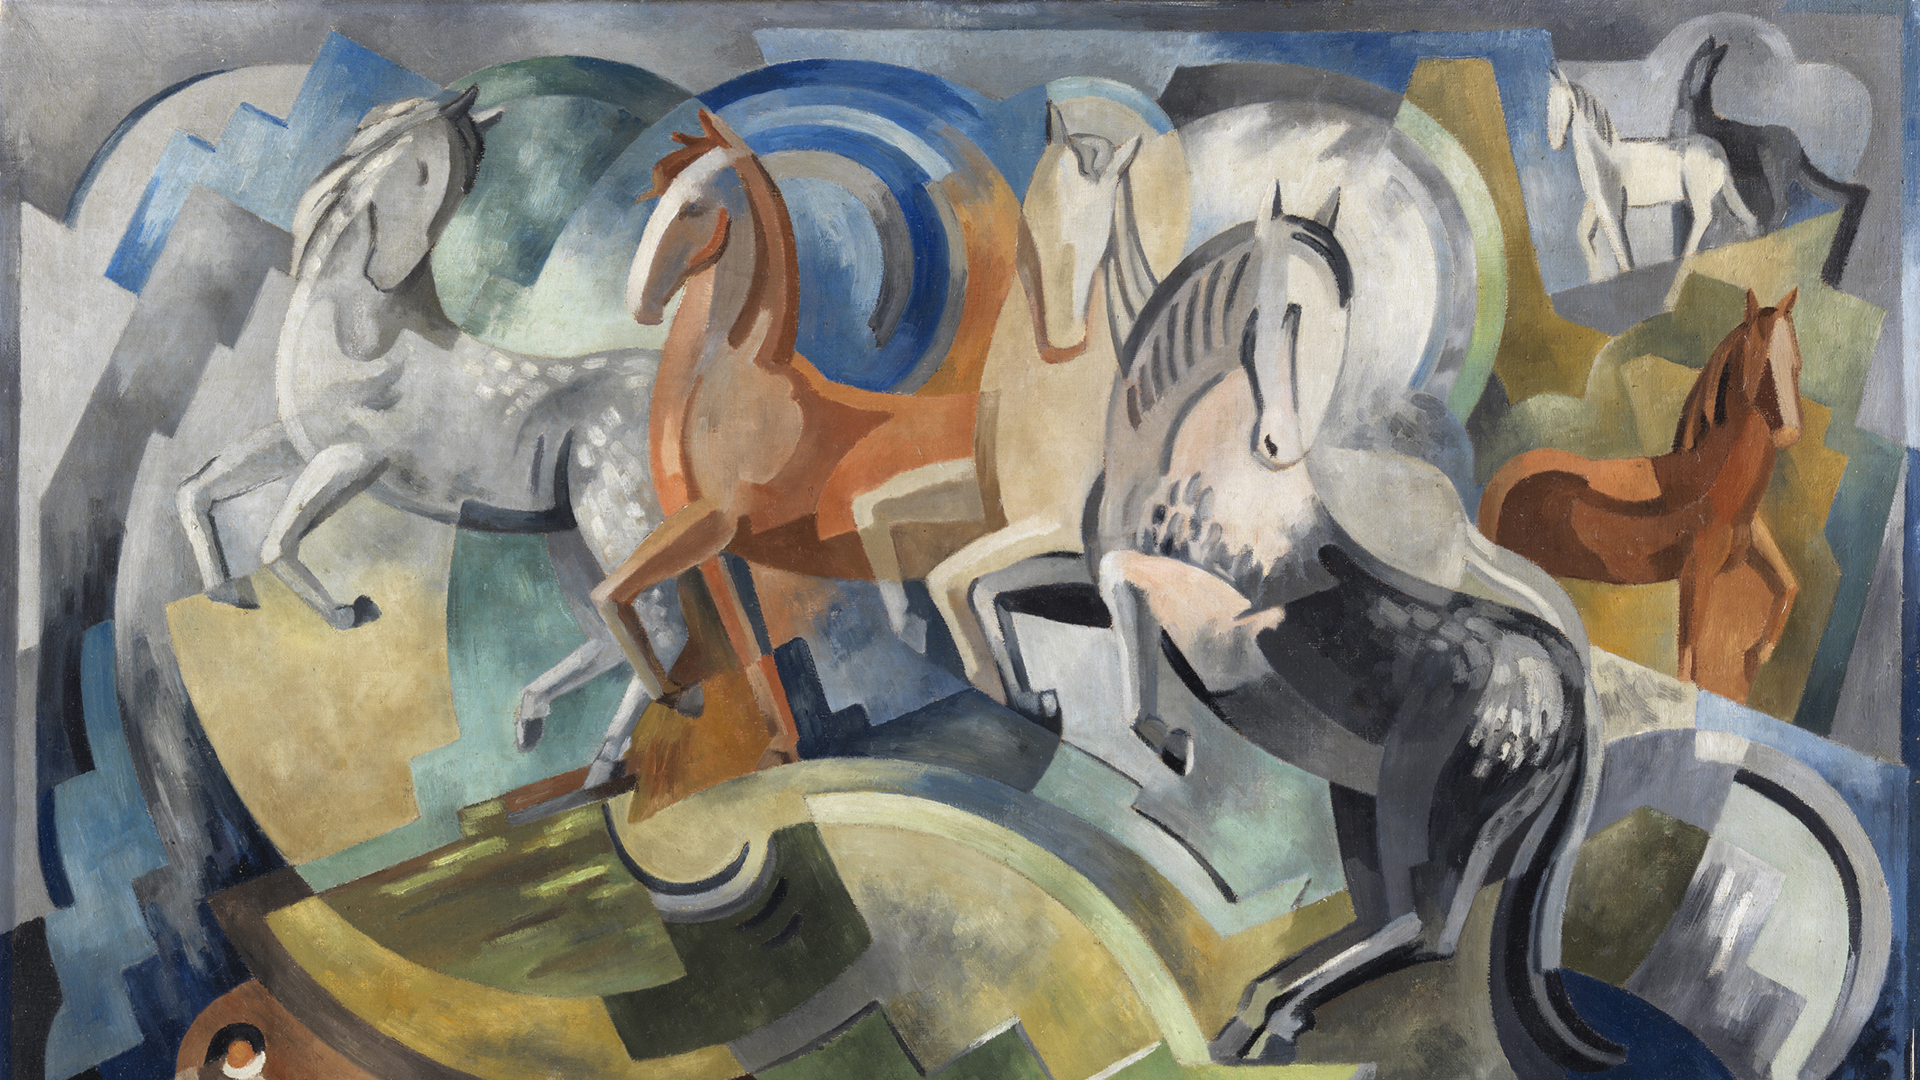 Cubist-style painting of a group of horses